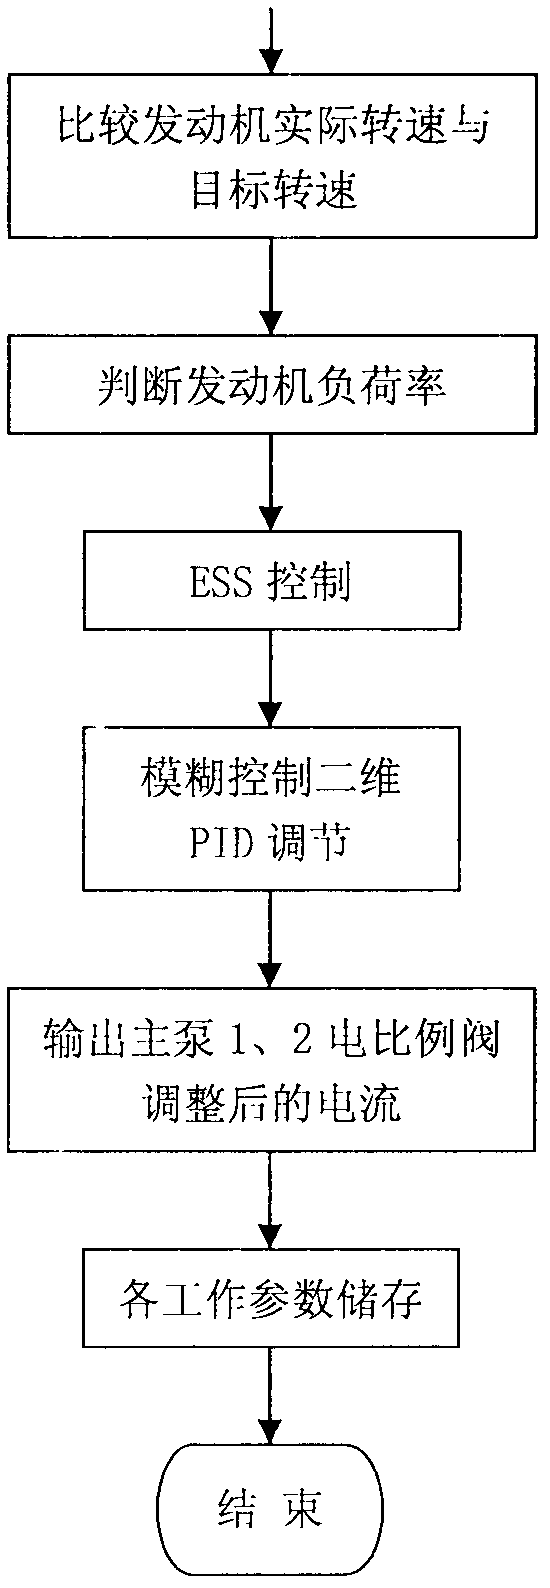 Energy-saving control method for cooling system of excavator